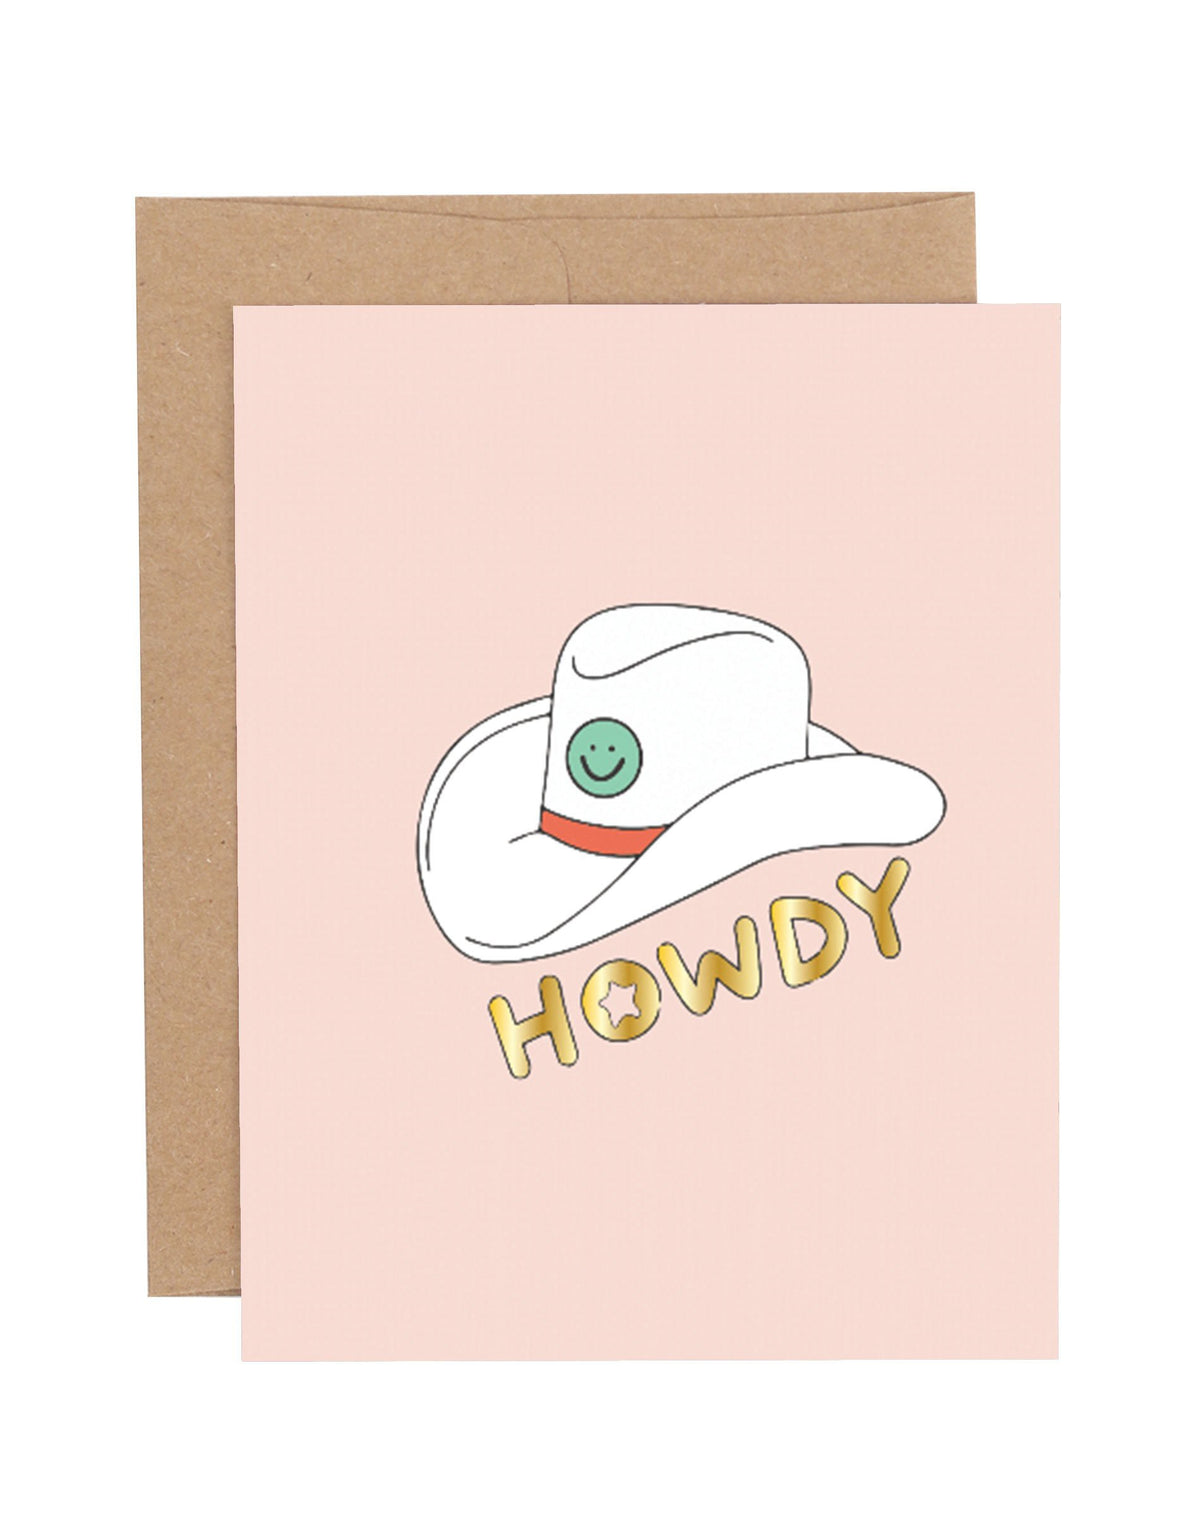 Howdy Friendship Greeting Card Cover